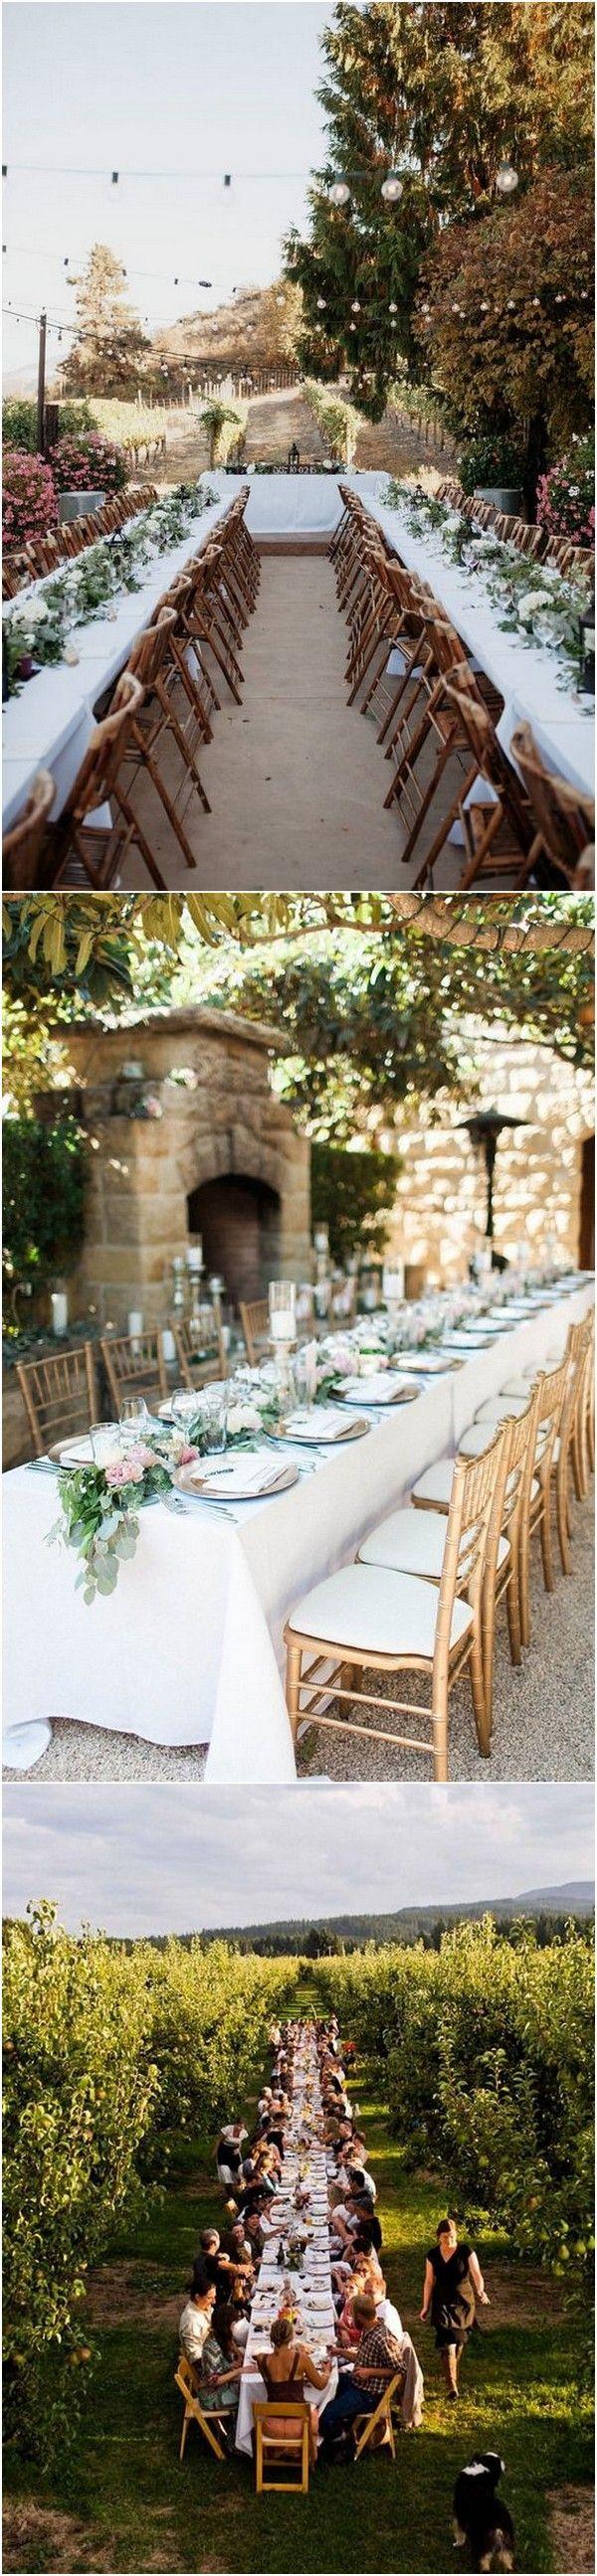 Wedding - 28 Chic Vineyard Themed Wedding Ideas For 2018 - Page 2 Of 2